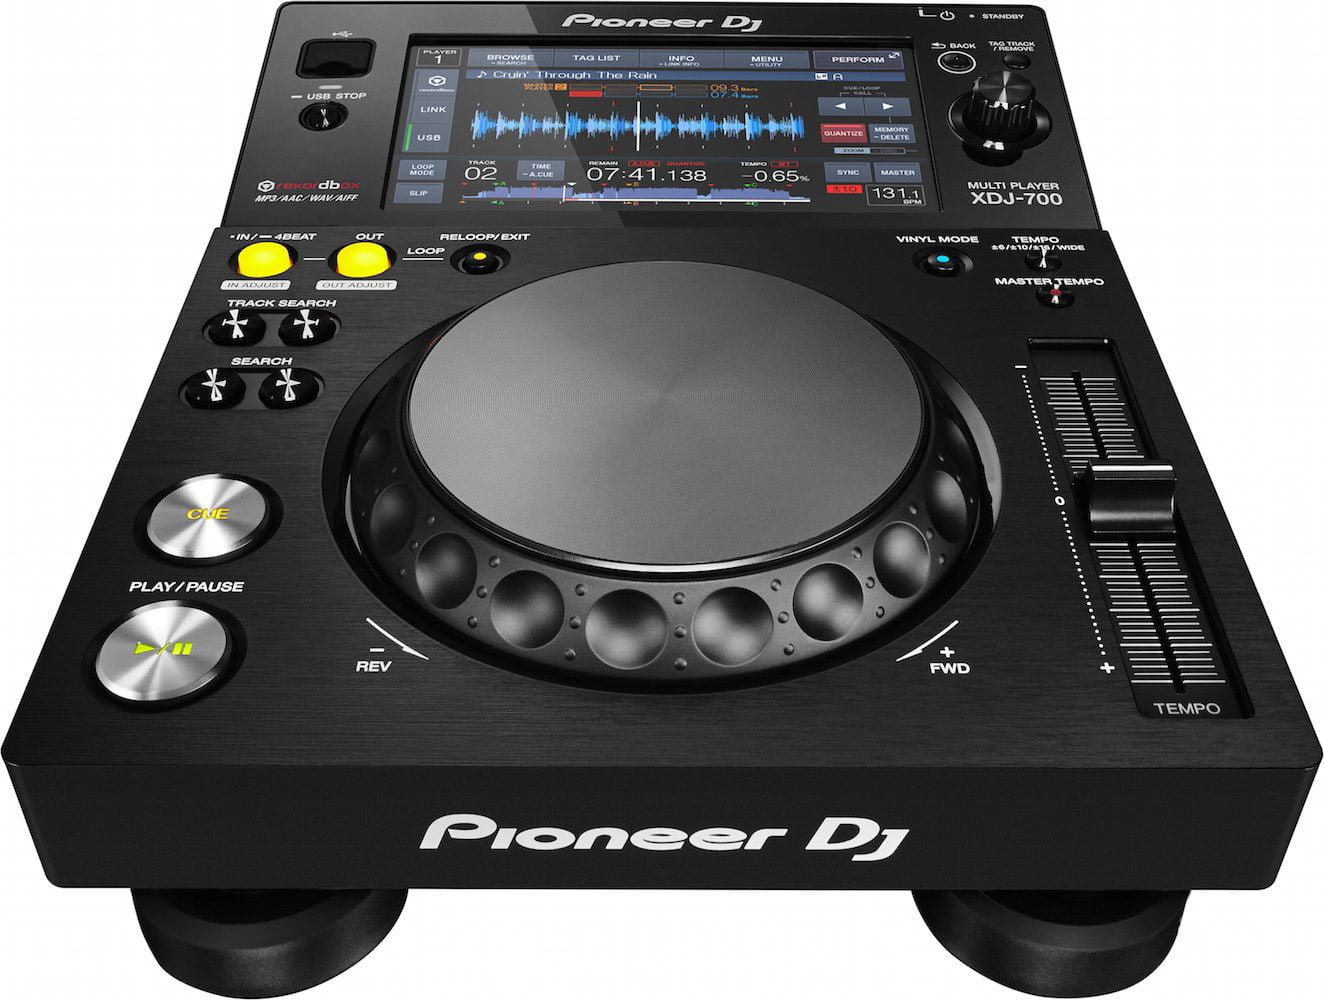 xdj-700-front-png